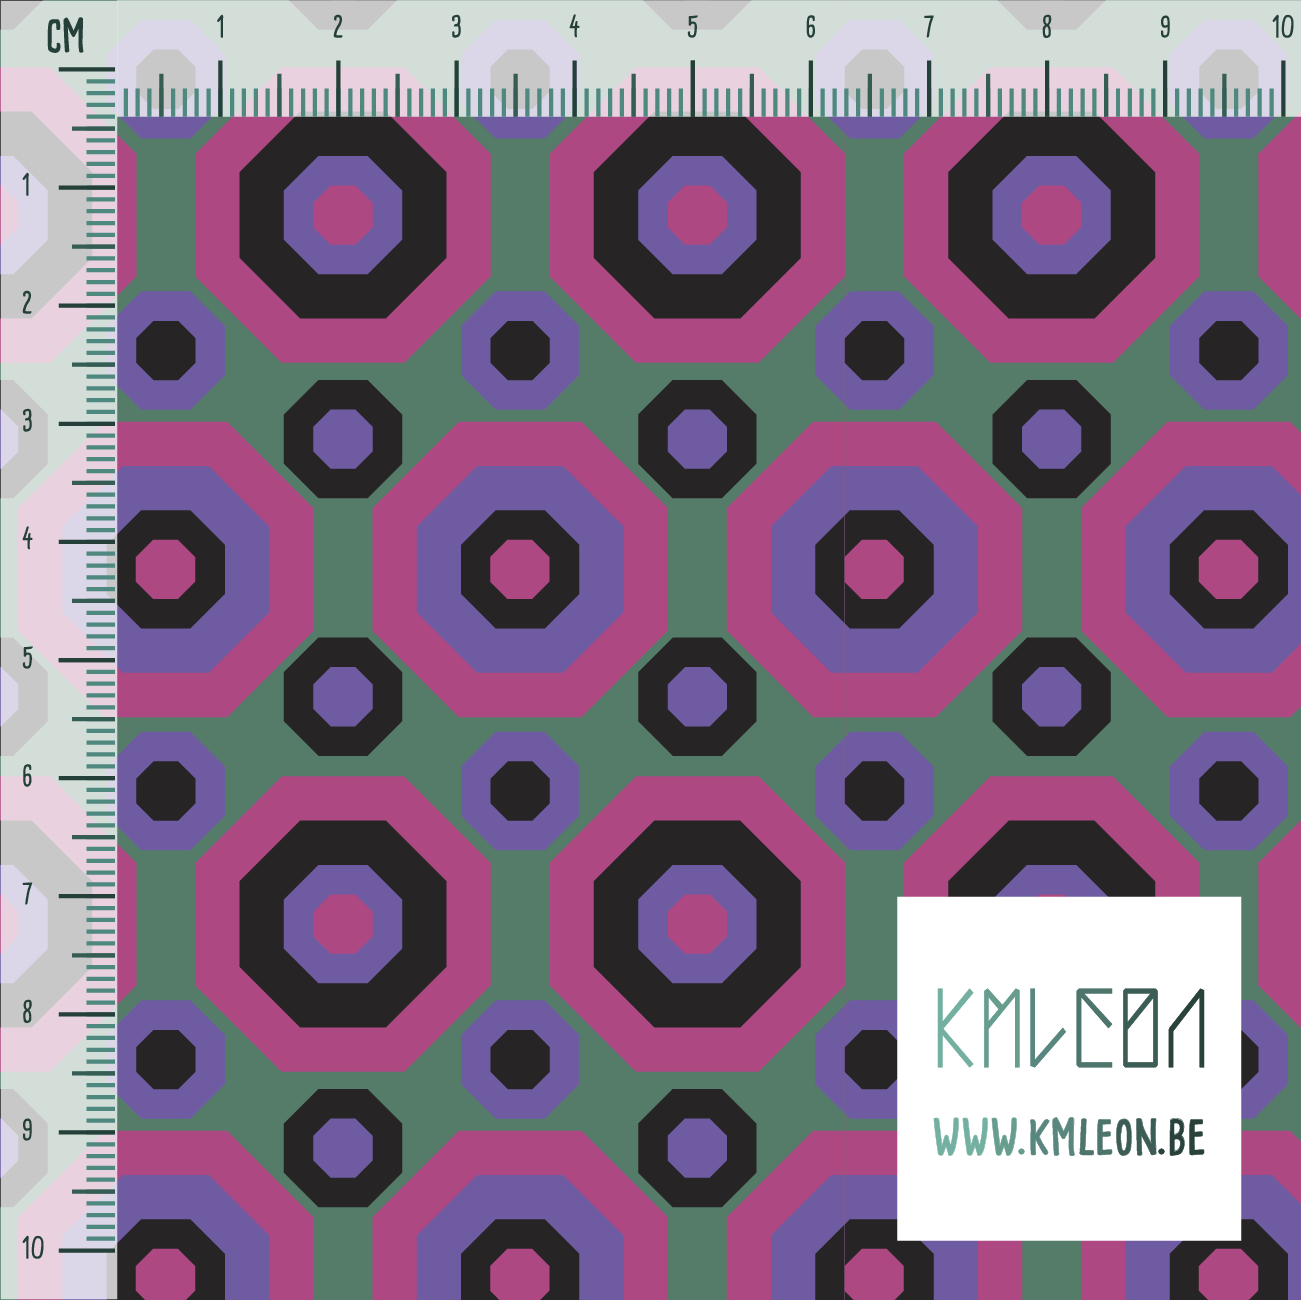 Retro octagons in pink, purple and black fabric